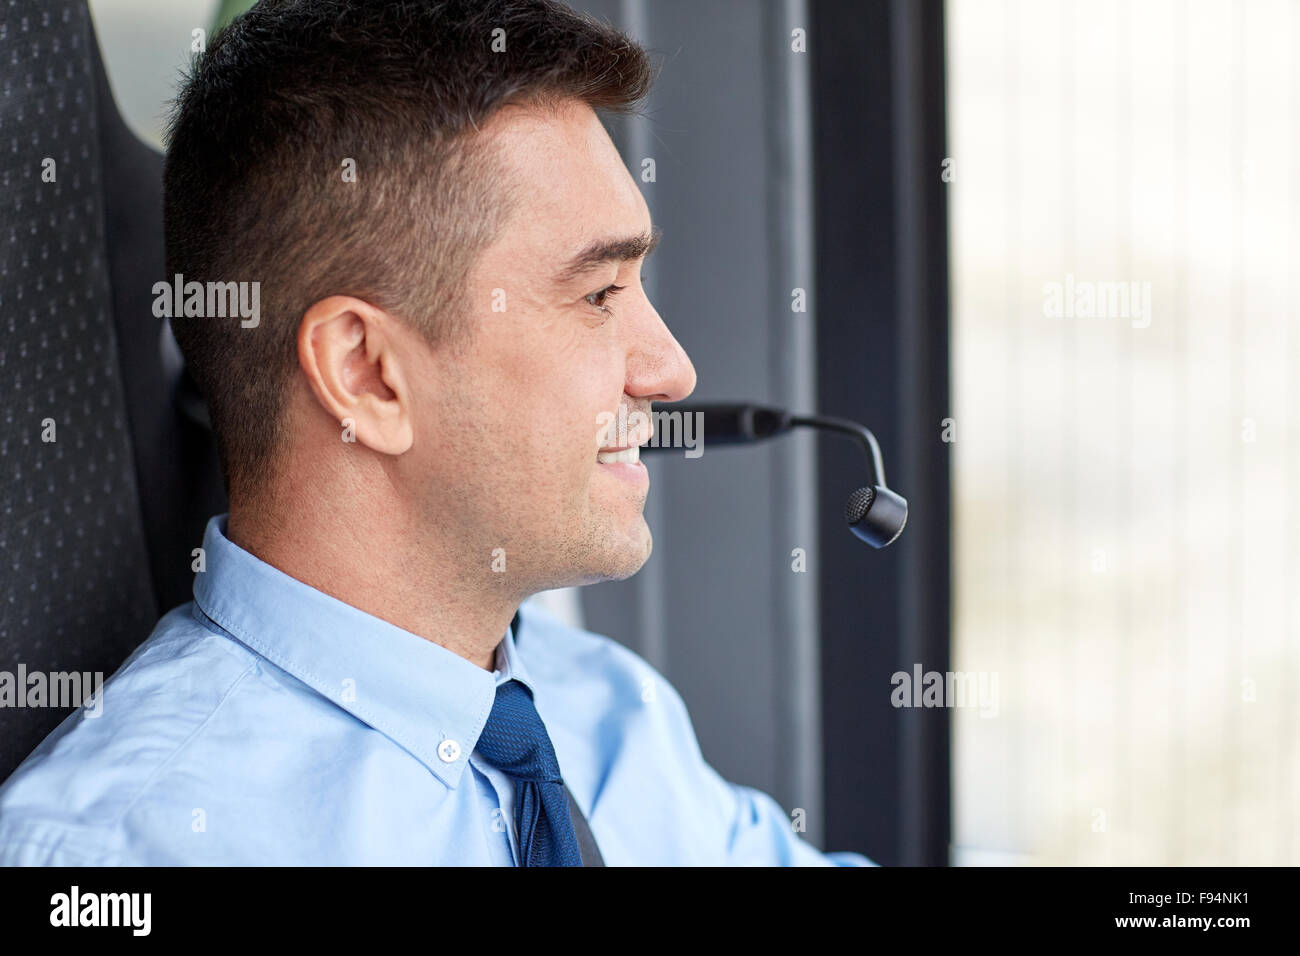 happy bus driver face with microphone Stock Photo